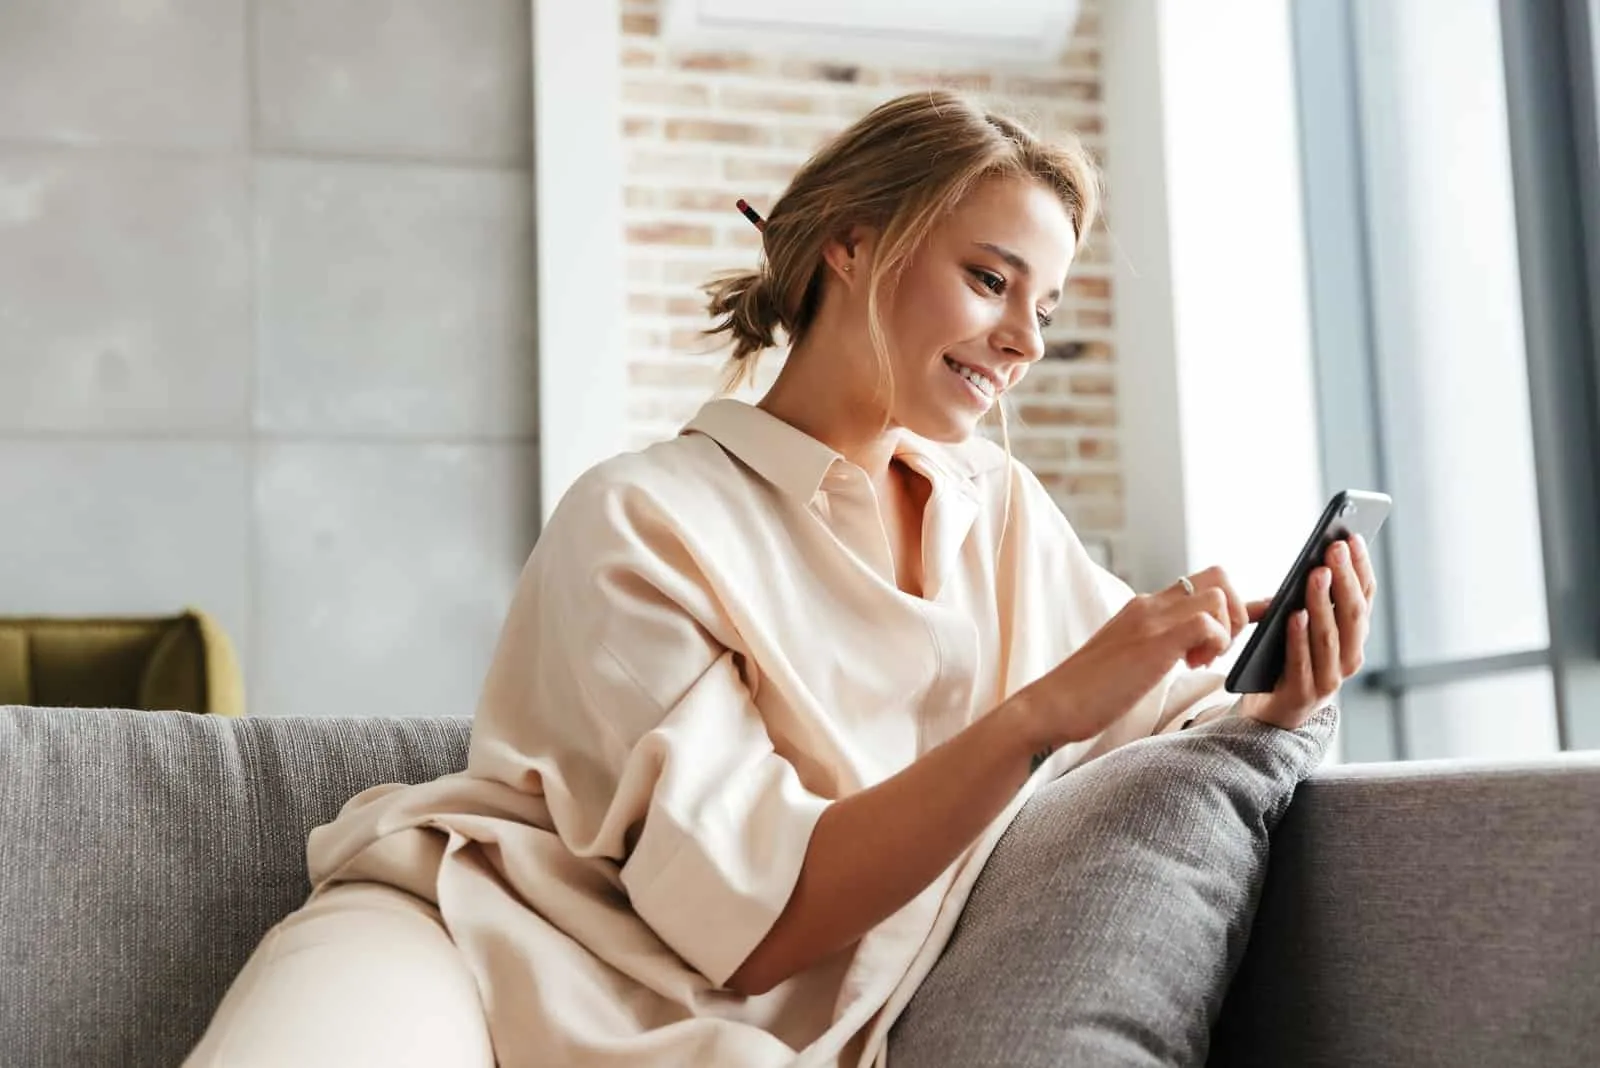 a smiling blonde hair woman sits on the couch and keys on the phone